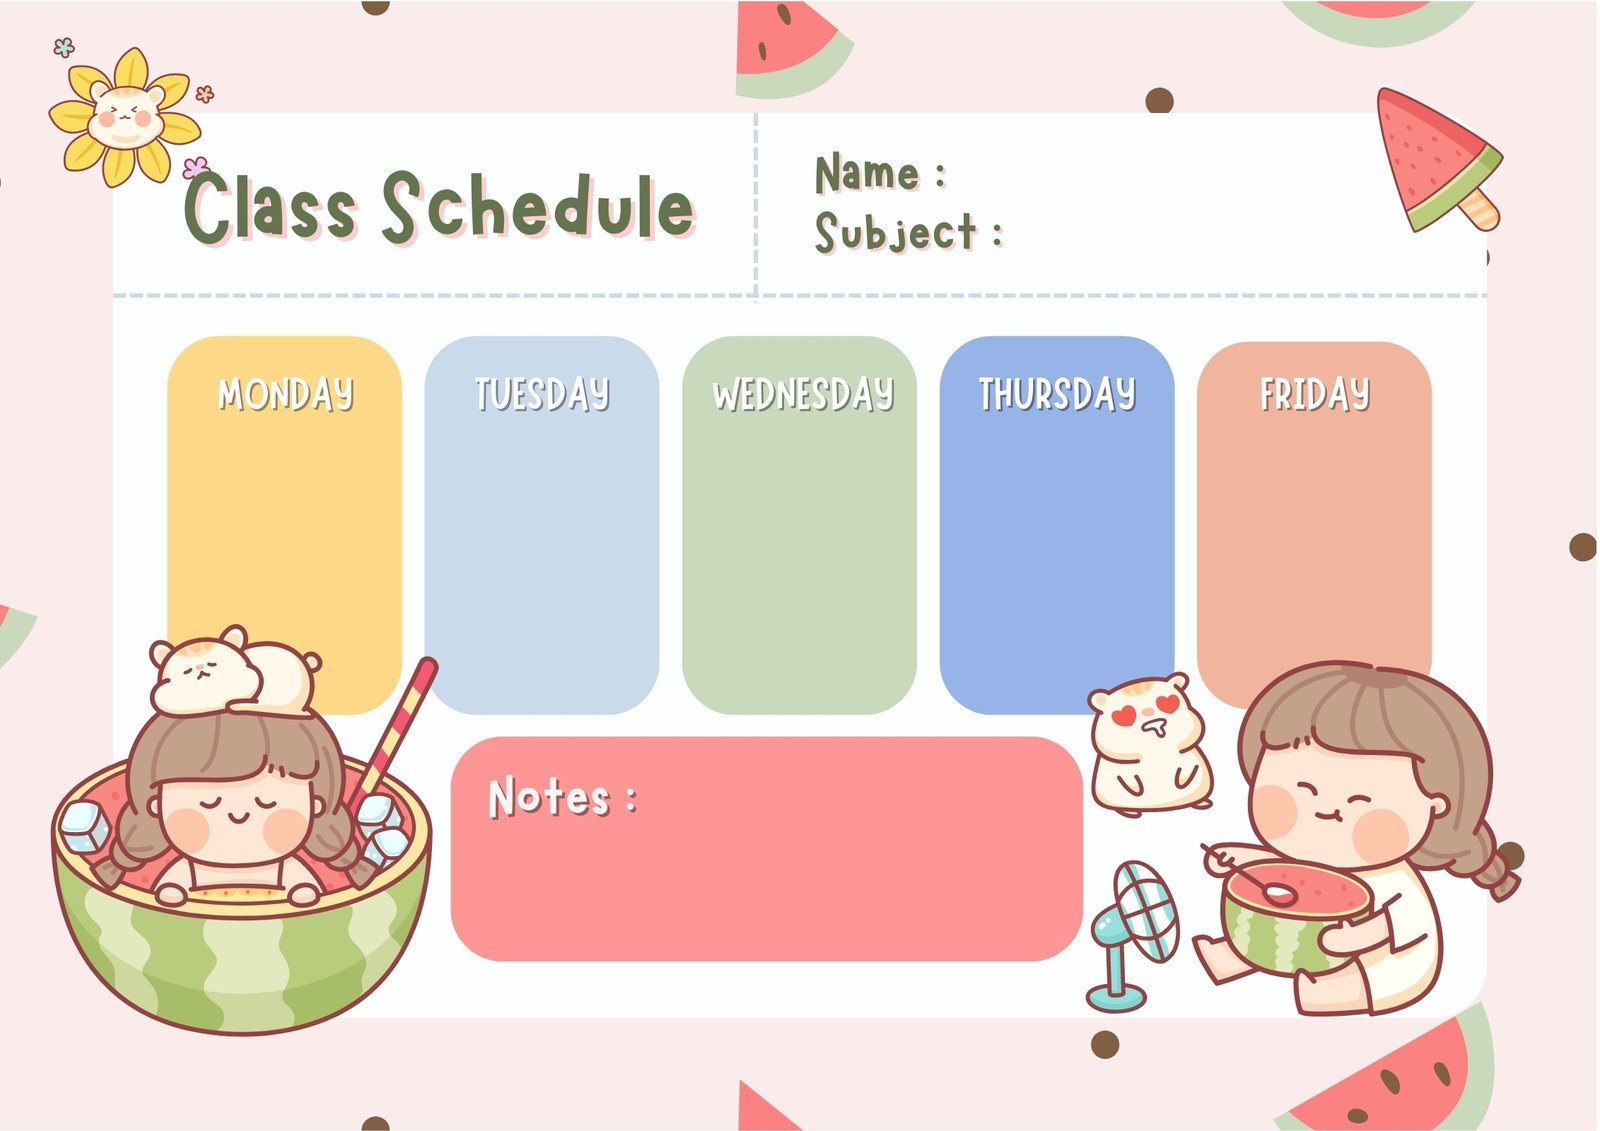 Cute Girl With Hamster Eating Watermelon Illustration - Class Schedule